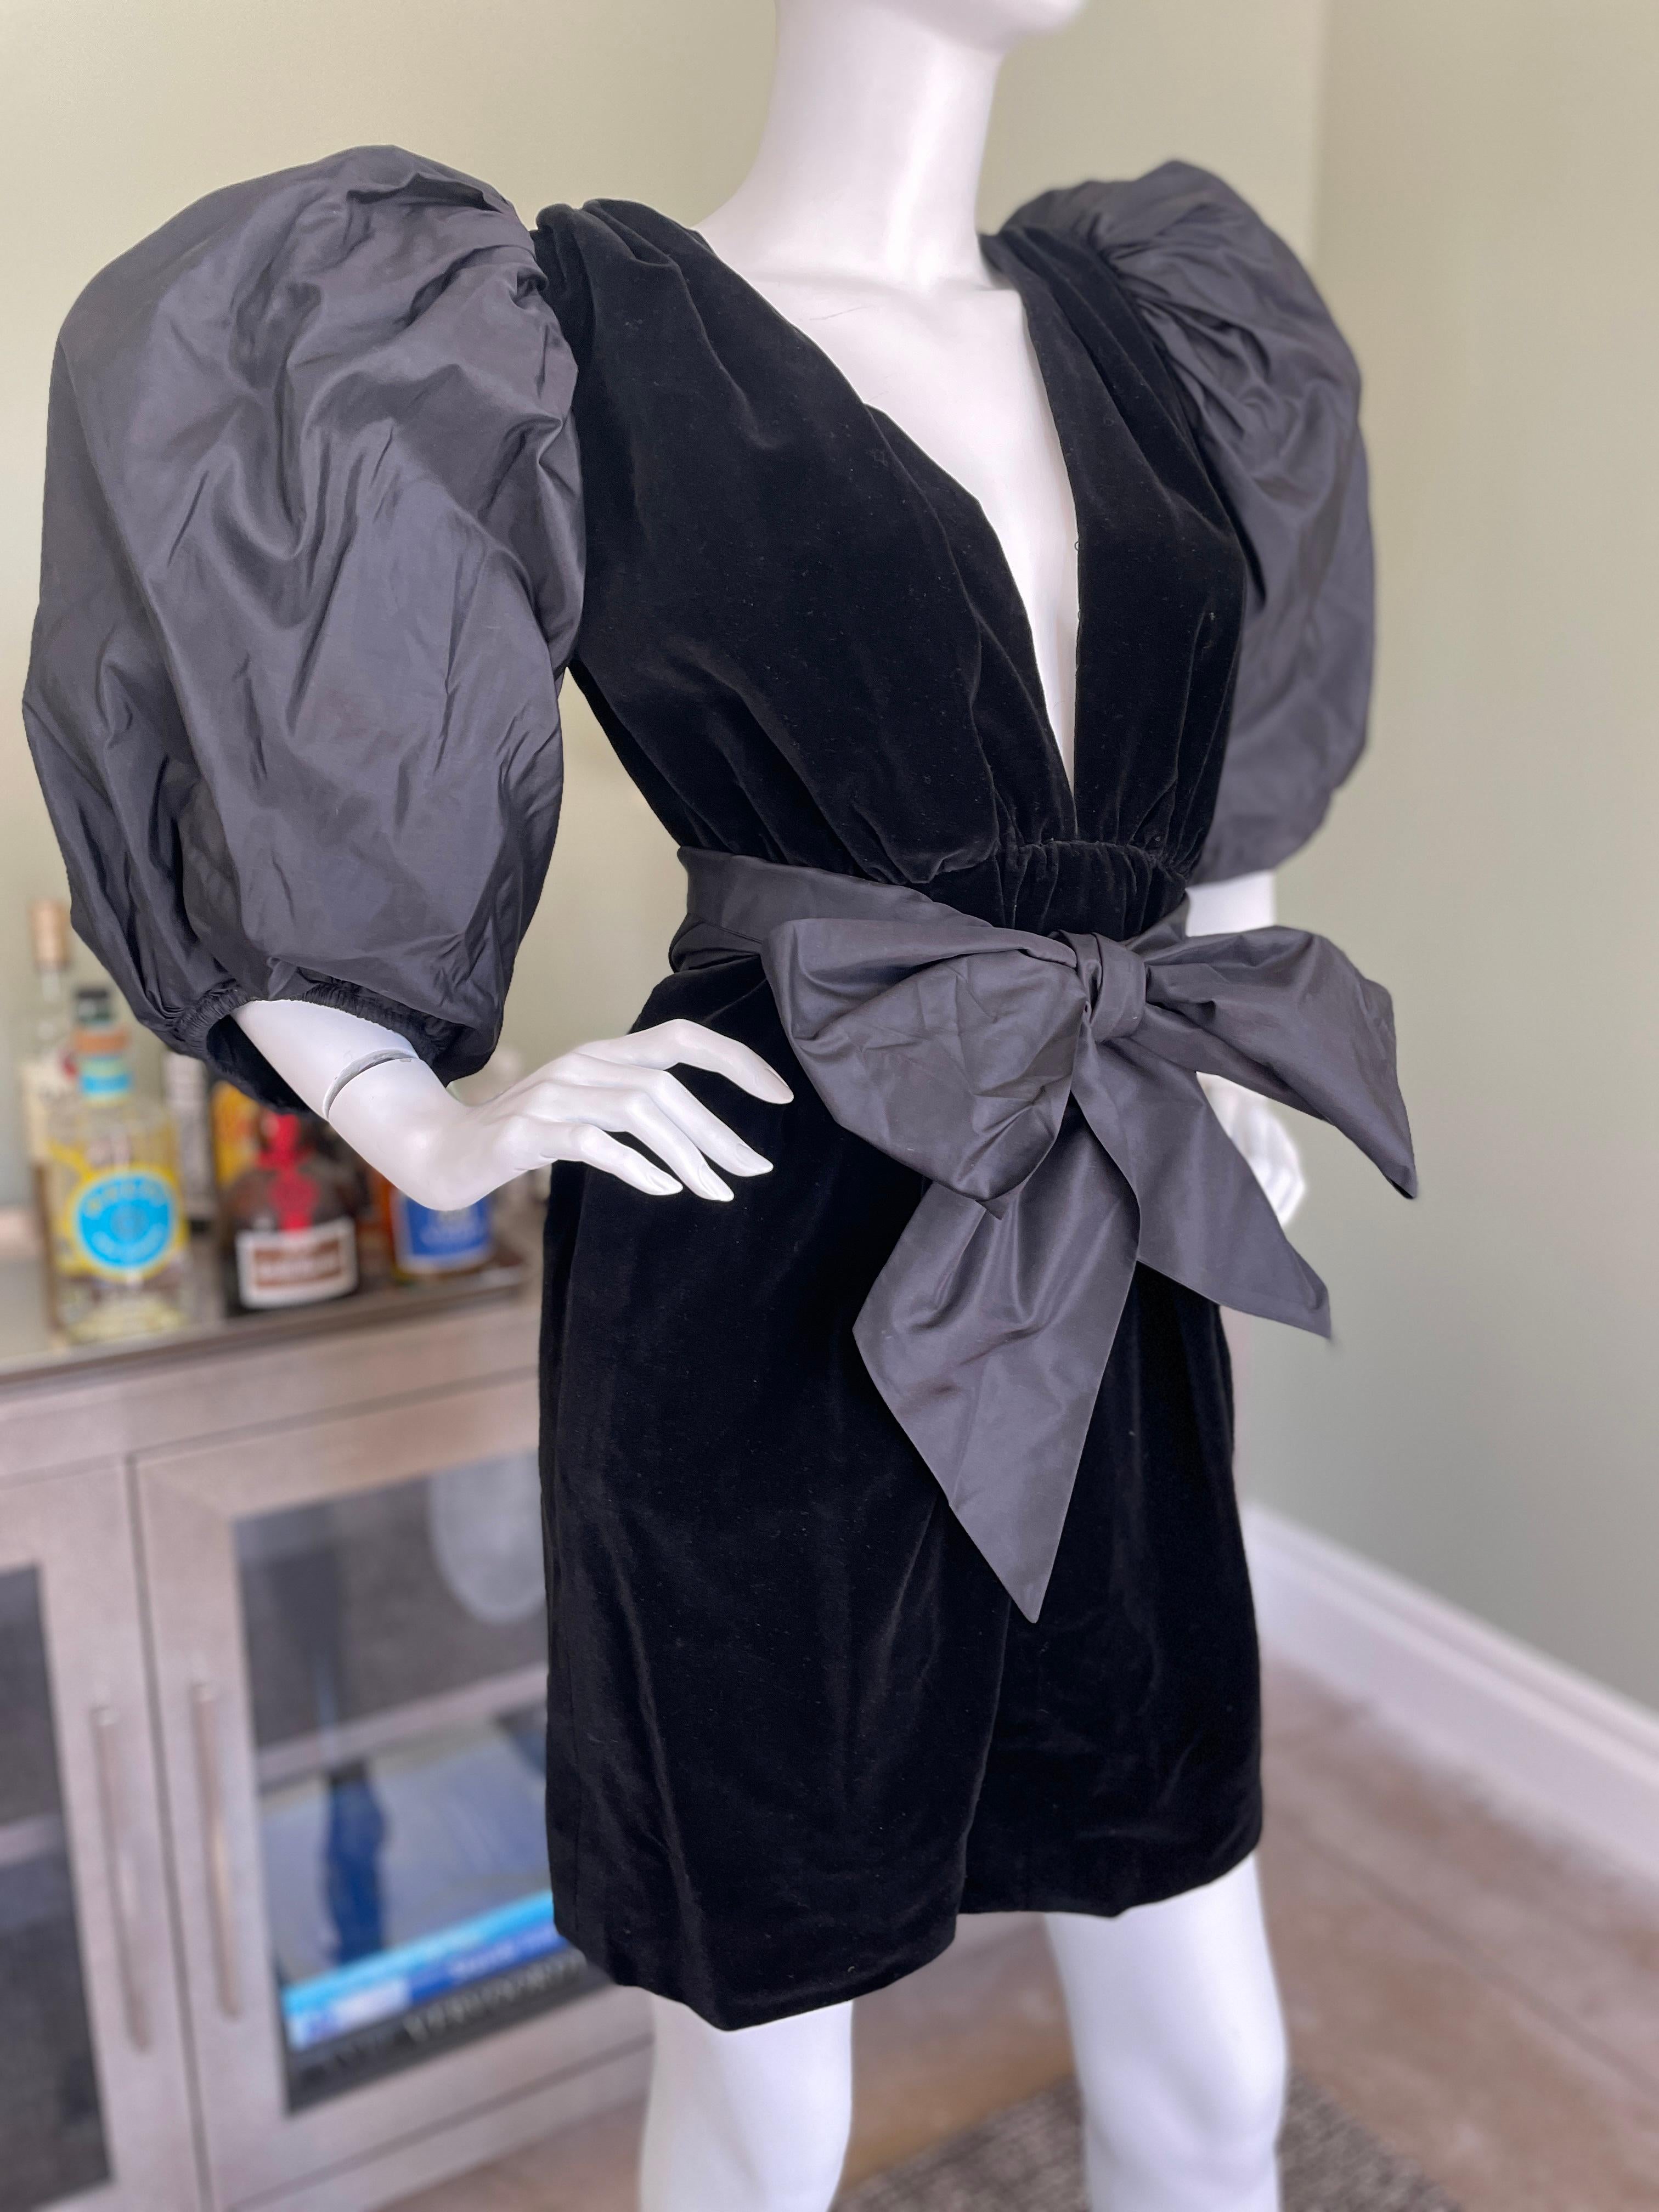 Yves Saint Laurent Rive Gauche 70's Velvet Cocktail Dress with Balloon Sleeves In Excellent Condition For Sale In Cloverdale, CA